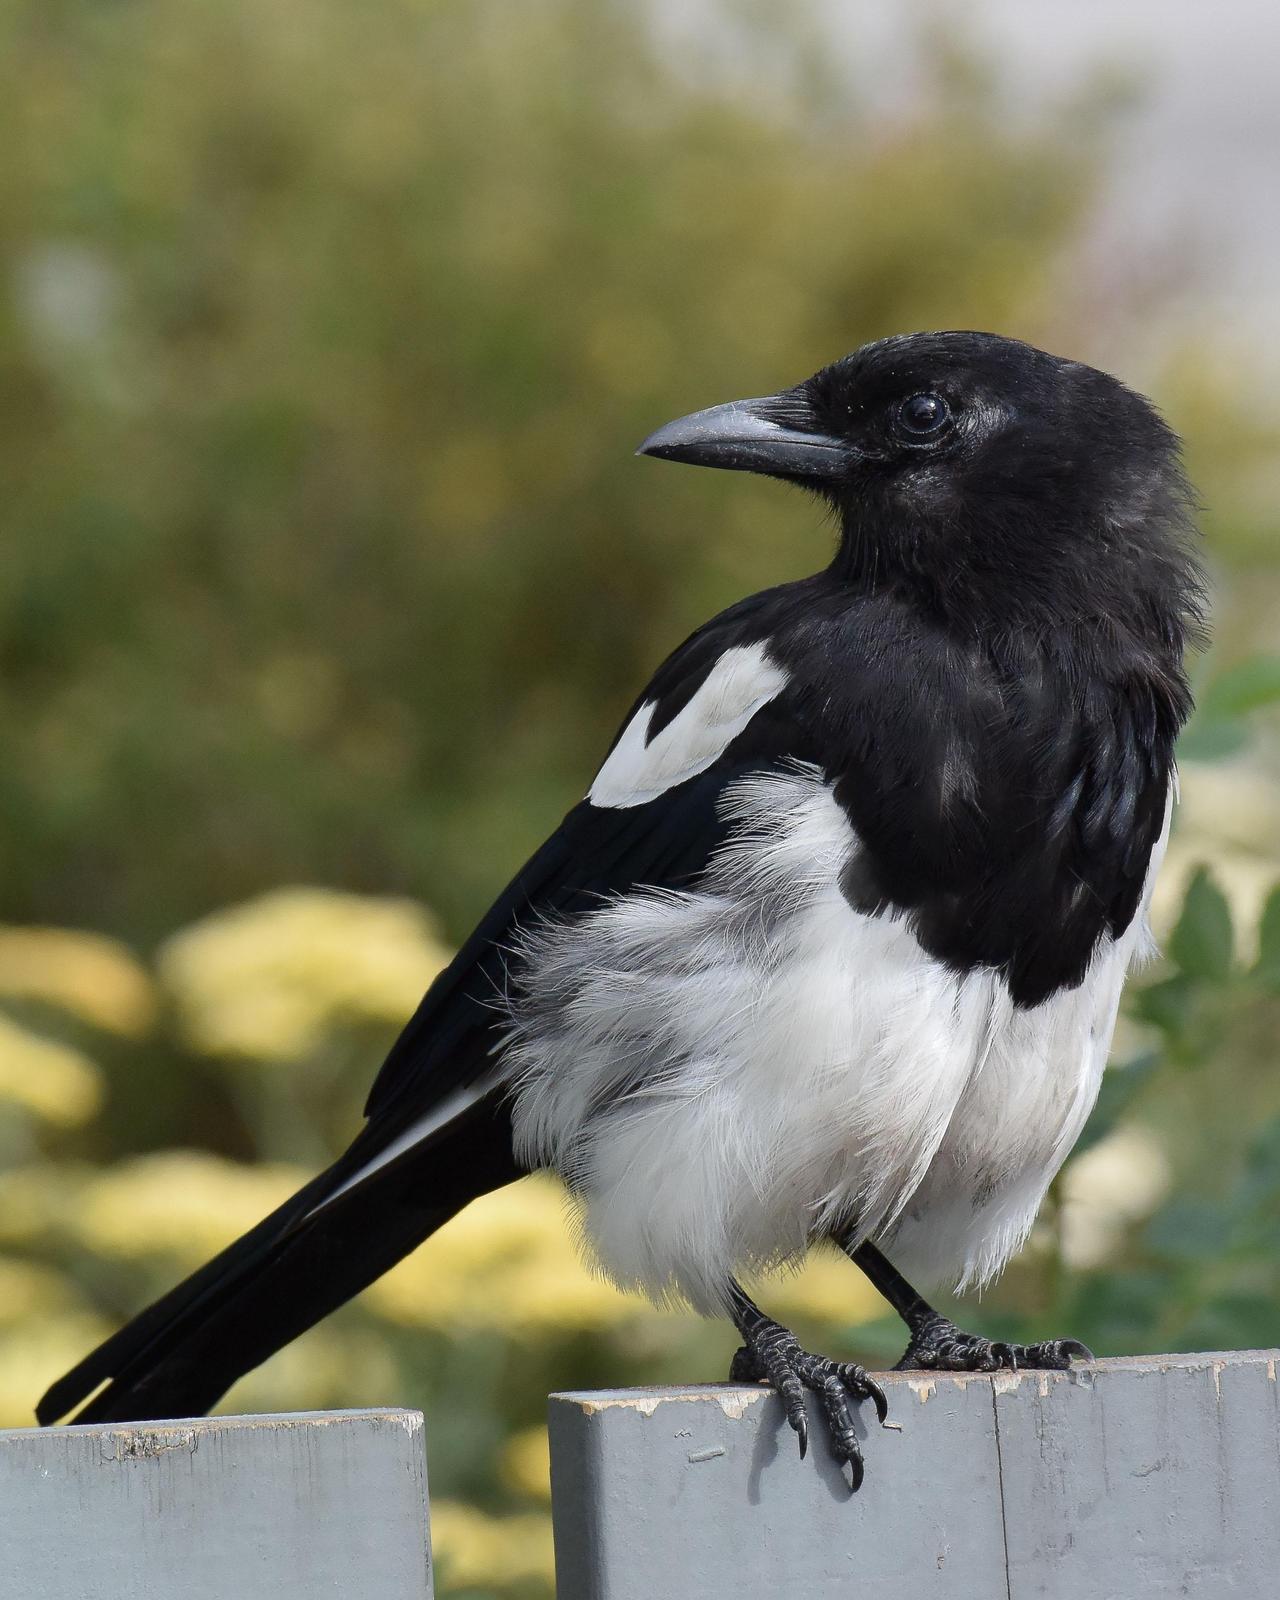 Black-billed Magpie Photo by Steve Percival